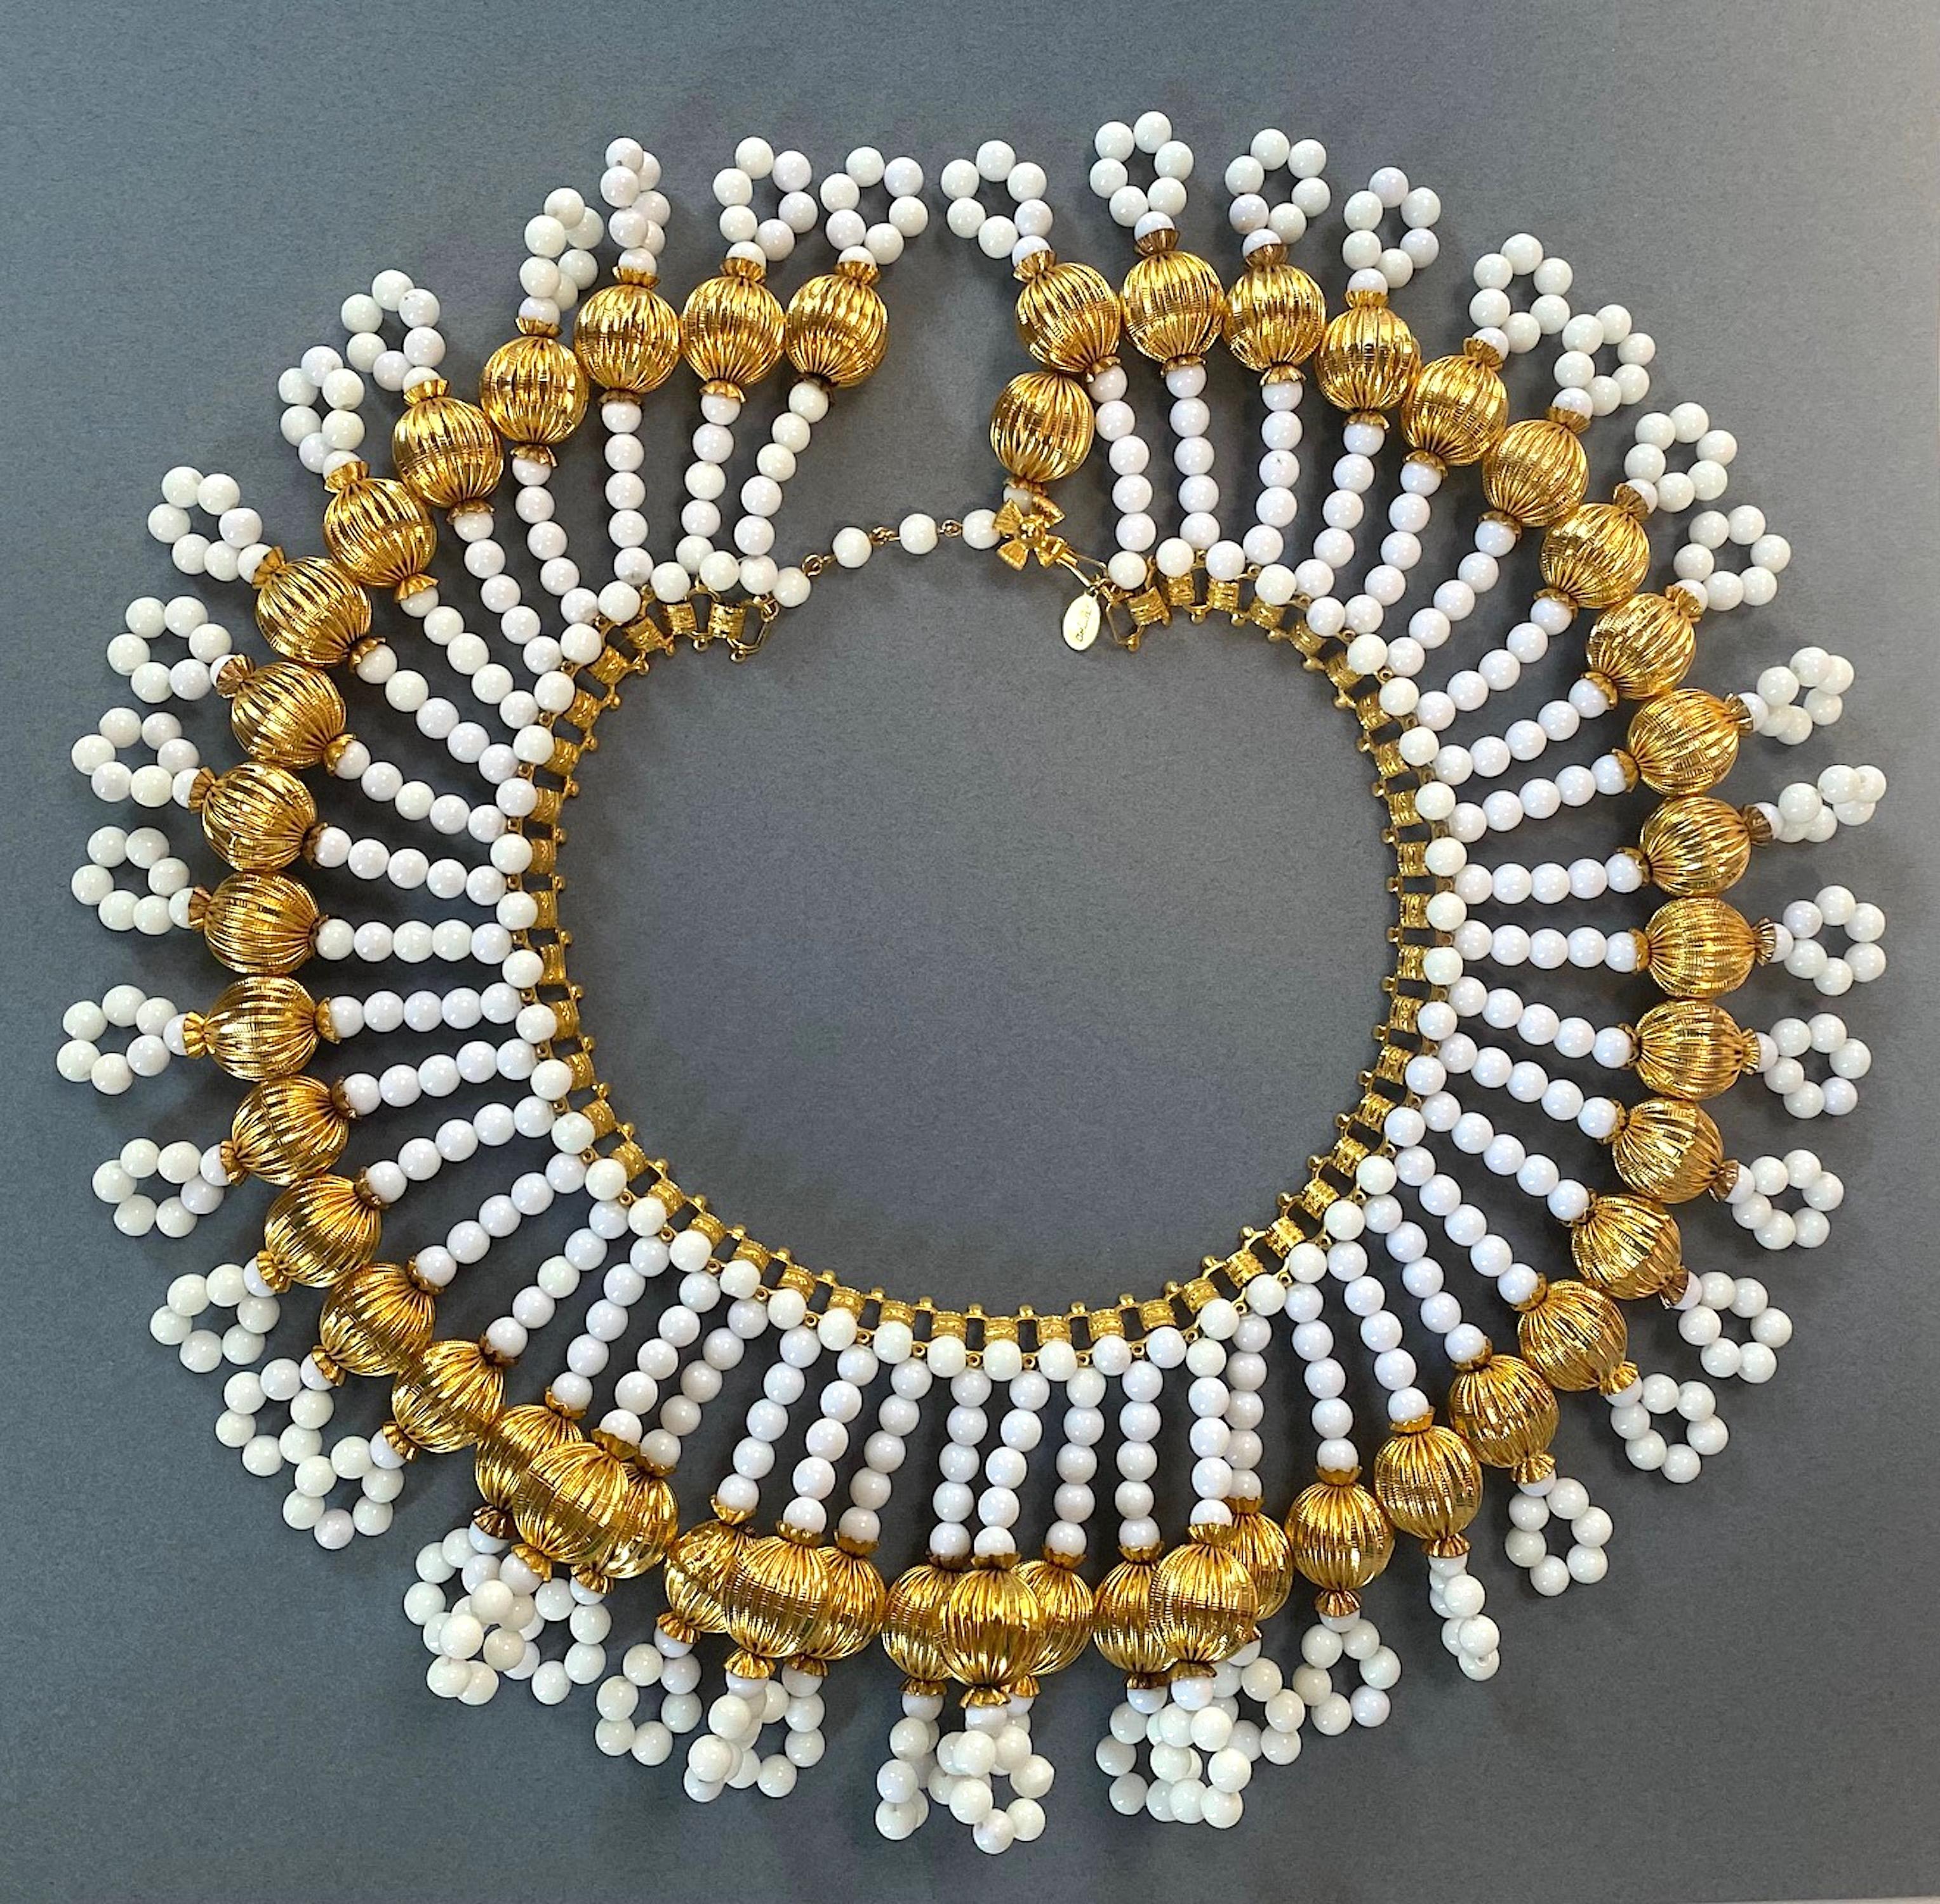 A dramatic large collar necklace by designer William De Lillo from the late 1960s to early 1970s. The necklace is comprised of a gold plate book chain style necklace with 45 hand strung 6 mm white glass bead fringe. Each fringe is accented with a